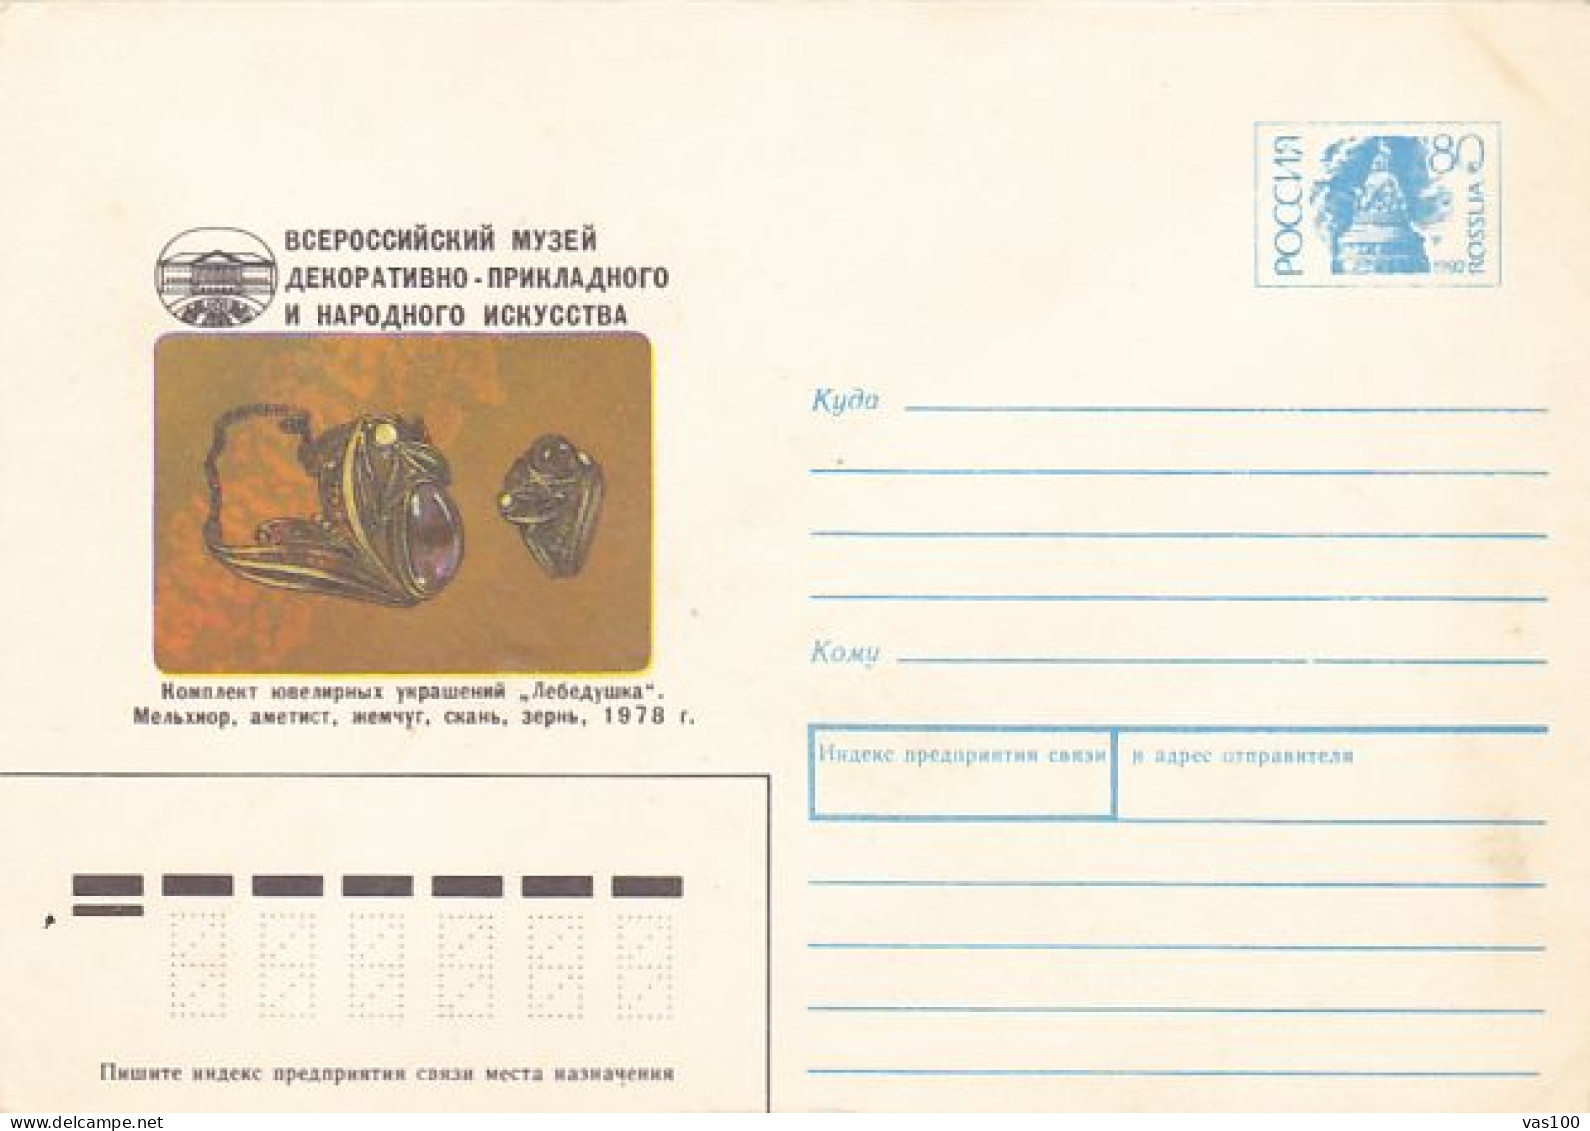 MOSCOW MUSEUM, JEWELRIES, COVER STATIONERY, ENTIER POSTAL, 1992, RUSSIA - Entiers Postaux